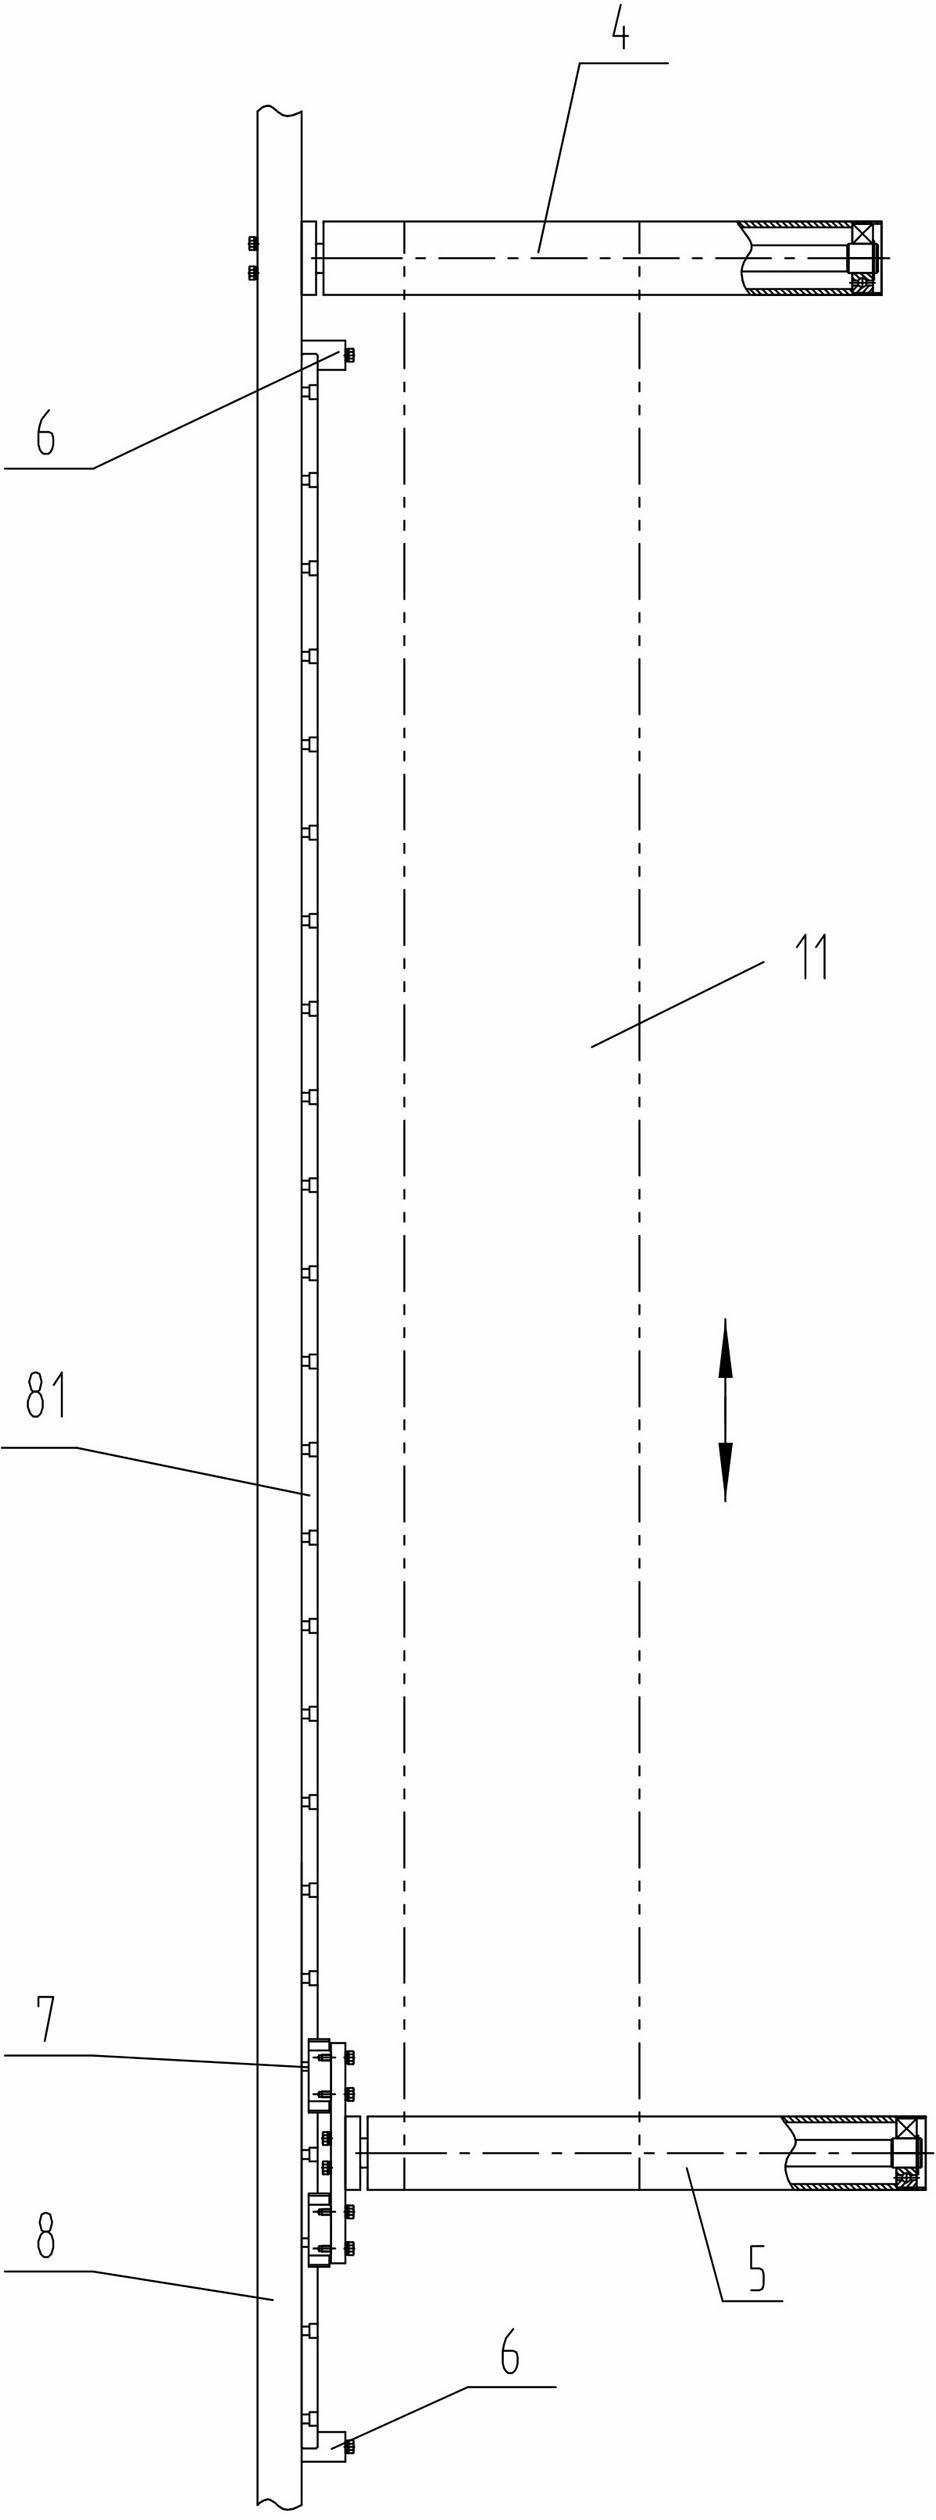 Membrane material transporting device for soft bag transfusion production line